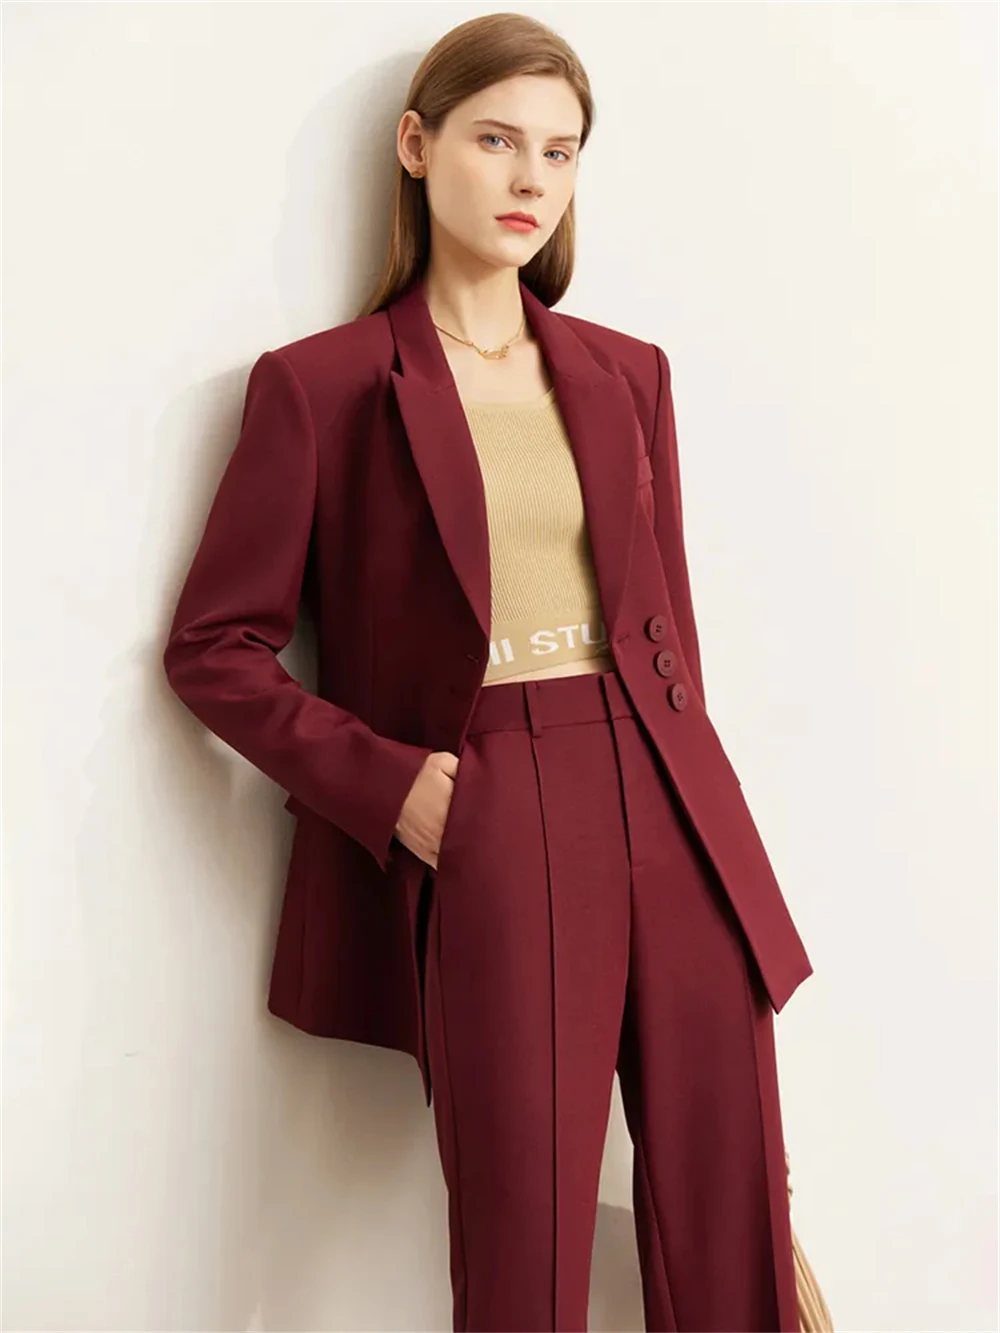 2023 Summer Women's Thin Two-Piece Suit: Casual Jacket and Trousers for Elegant Office Outfits and Manager Fashion